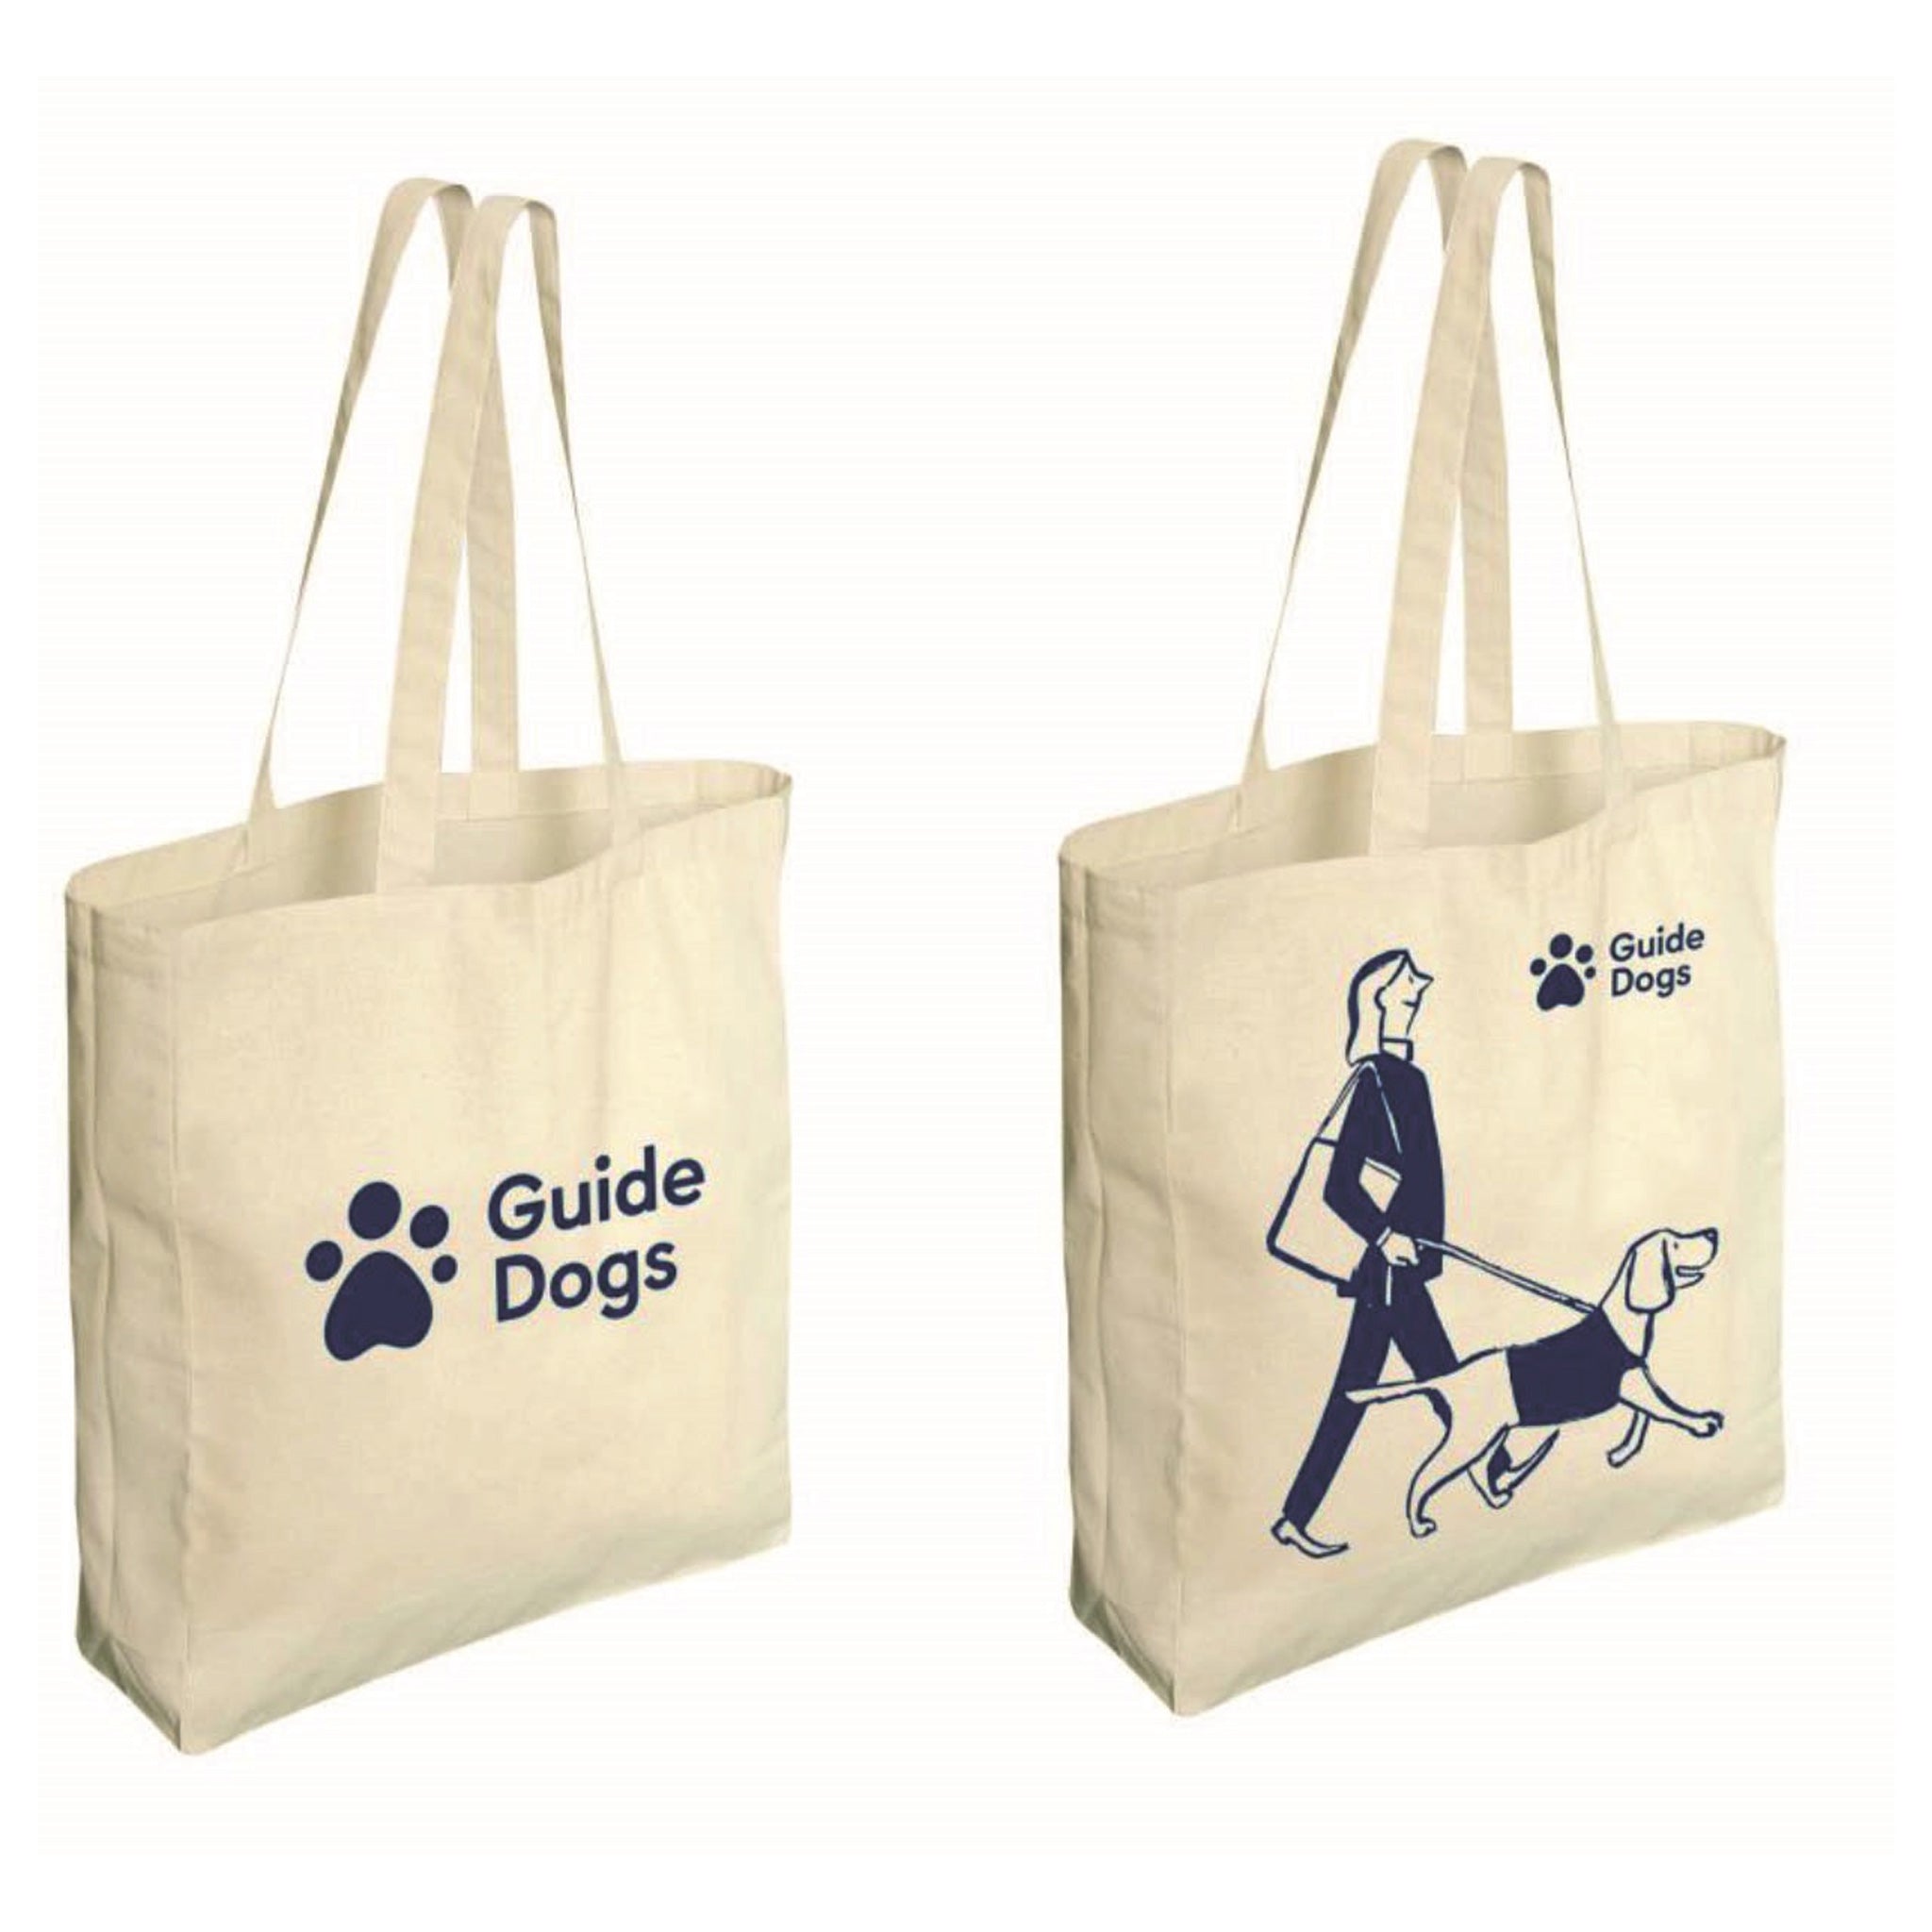 BioBag  Dog  Pet Waste Collection Products